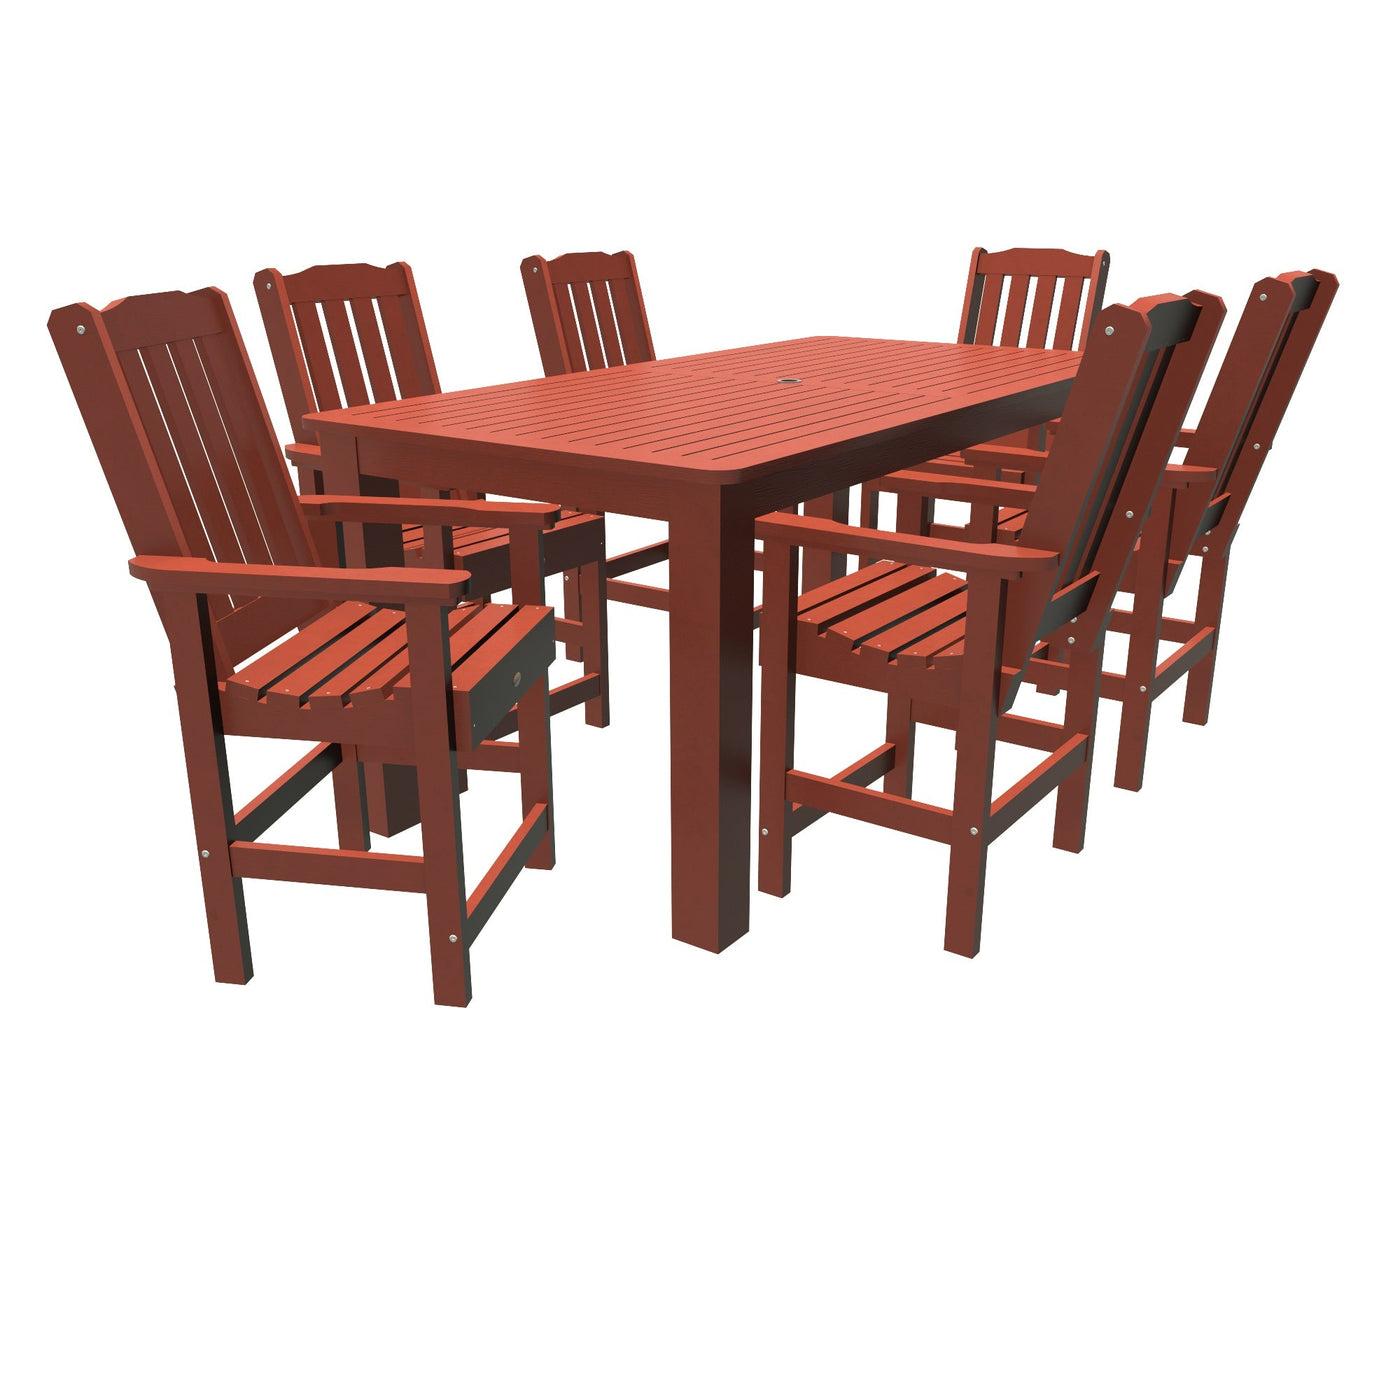 Lehigh 7pc Rectangular Outdoor Dining Set 42in x 84in - Counter Height Dining Highwood USA Rustic Red 